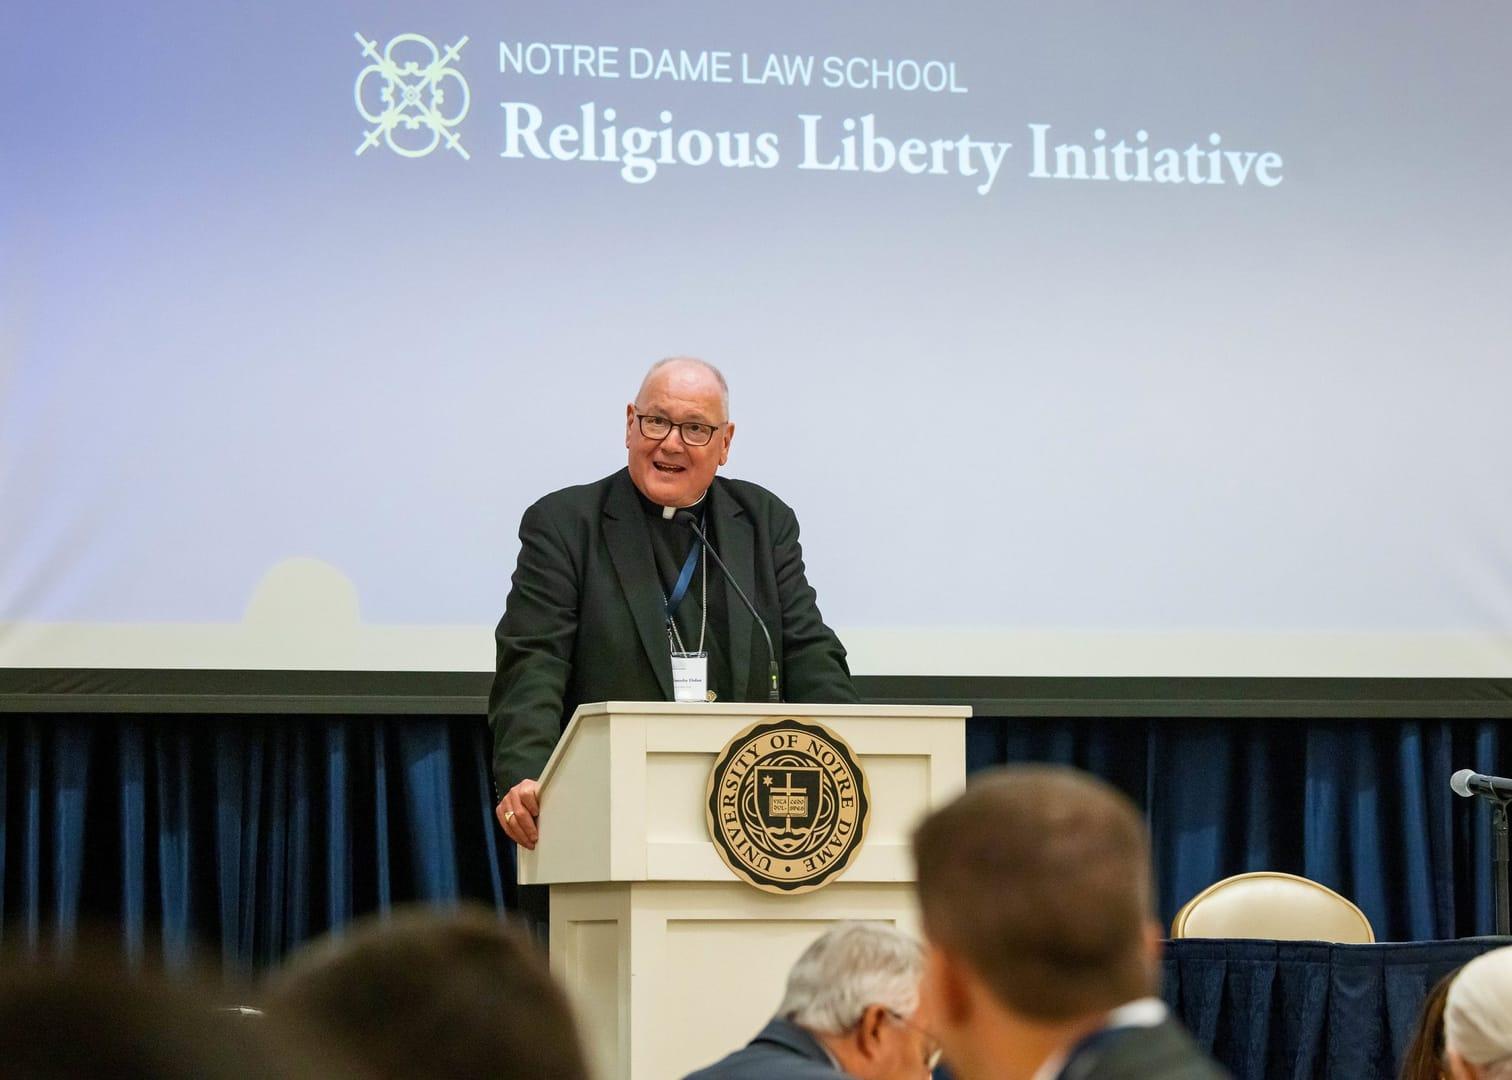 Dolan: Religious freedom is a human right and ‘essential’ to human dignity